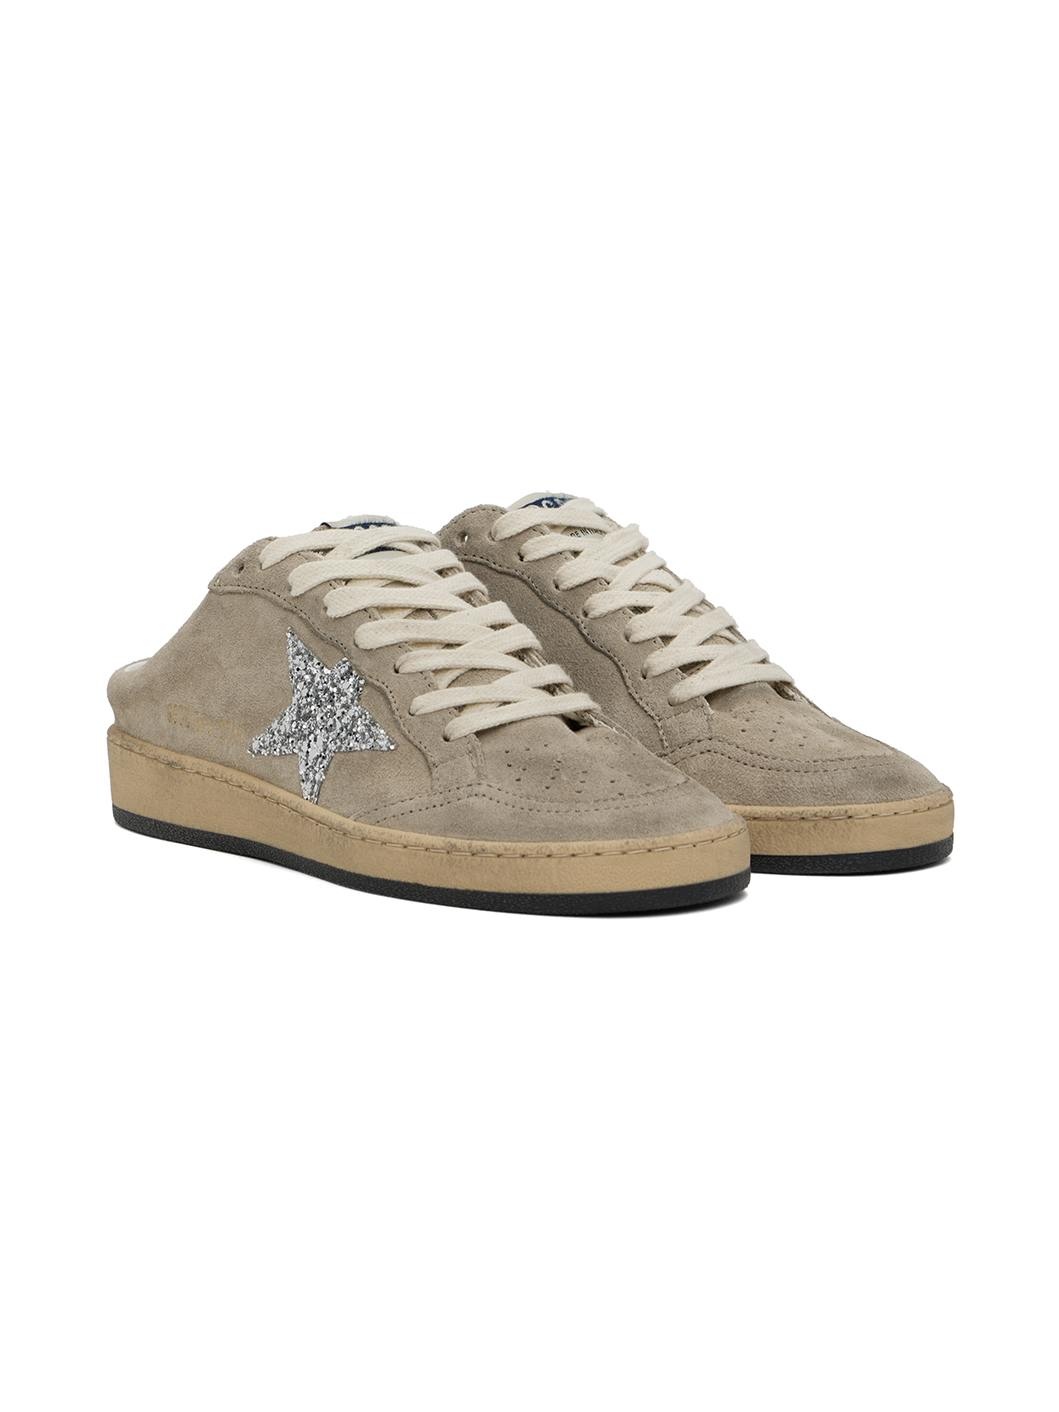 Taupe Ball Star Sabot Sneakers - 4